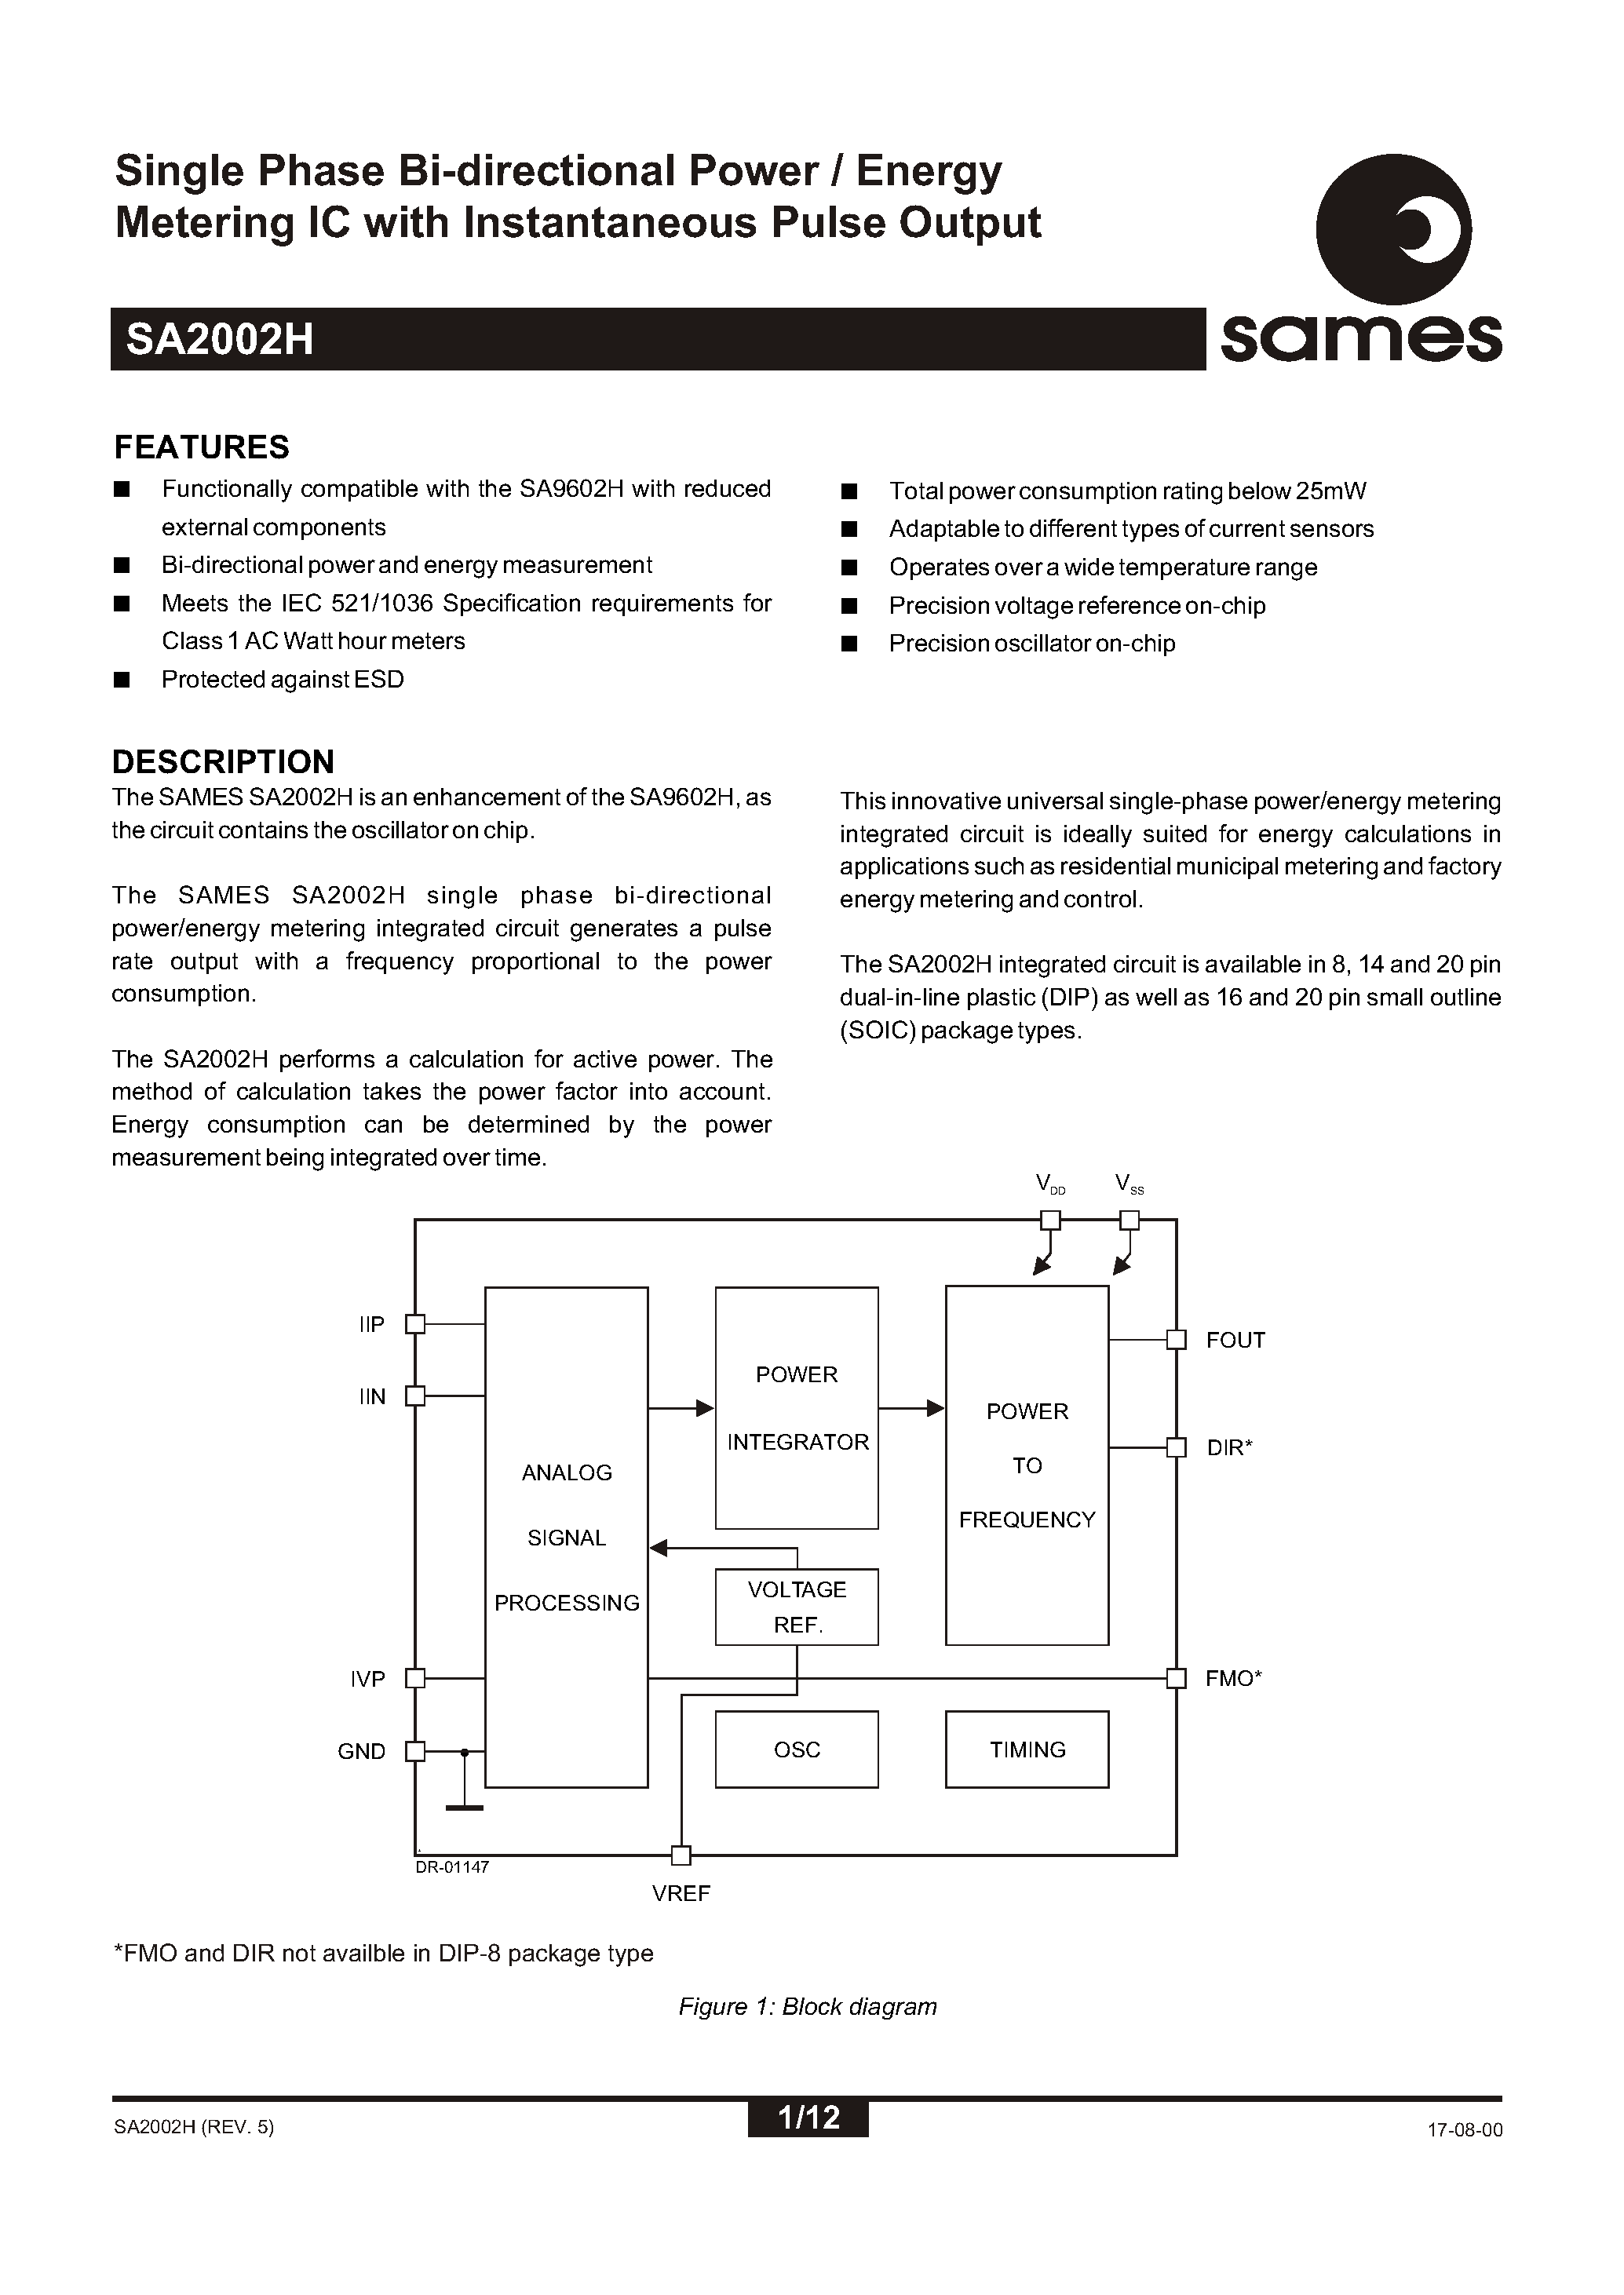 Datasheet SA2002H - Single Phase Bi-directional Power / Energy Metering IC with Instantaneous Pulse Output page 1